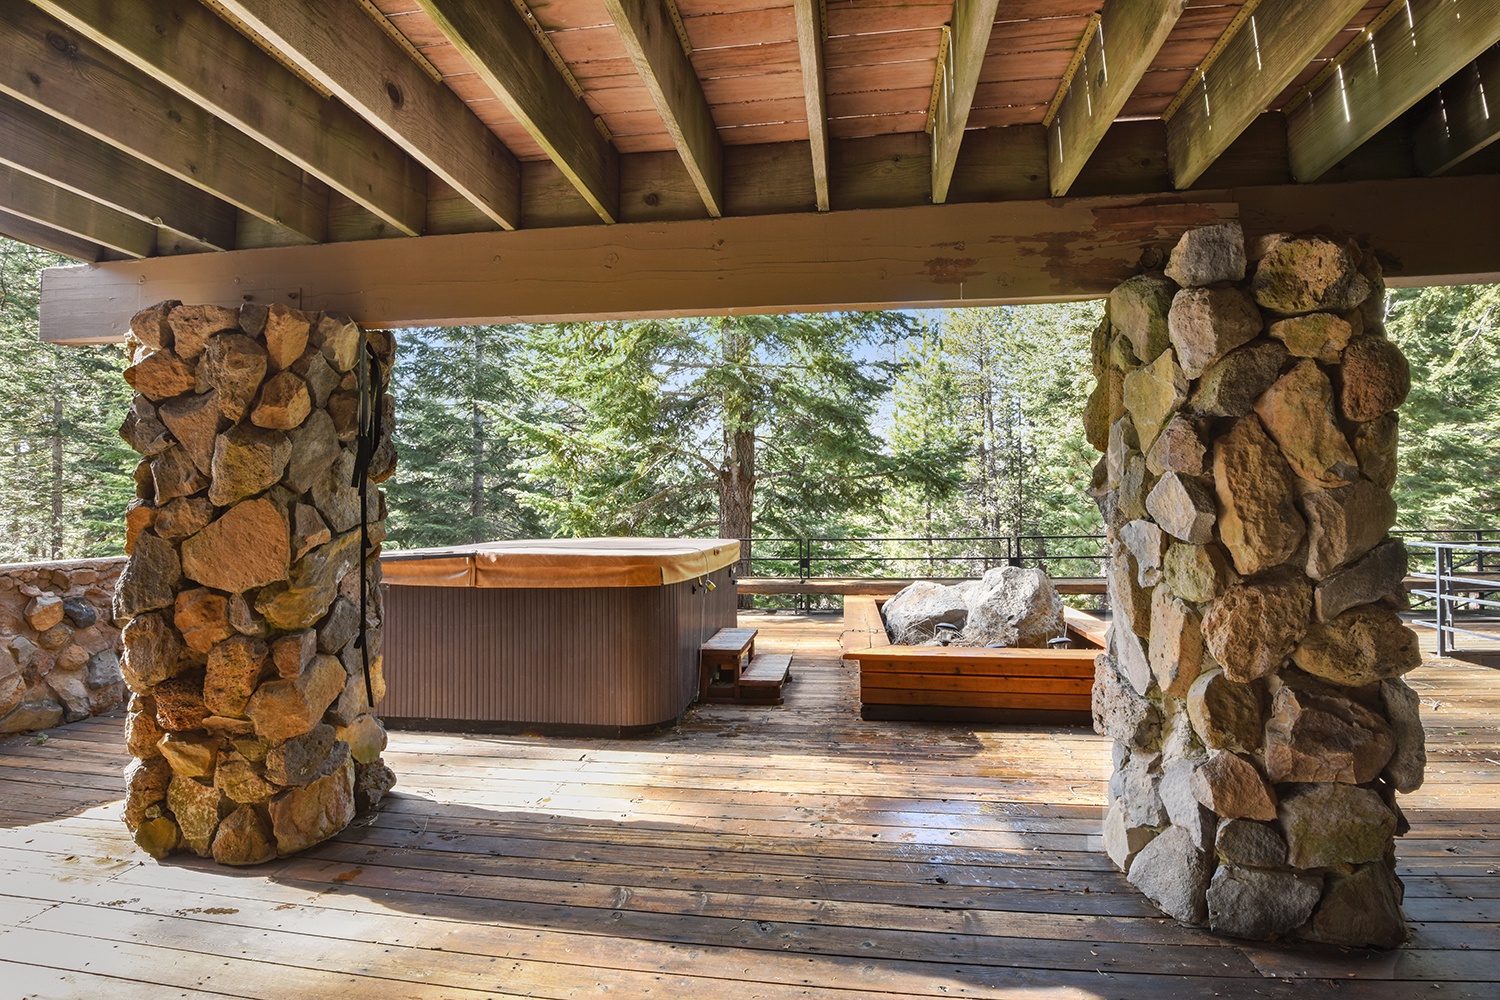 Hot tub and large deck